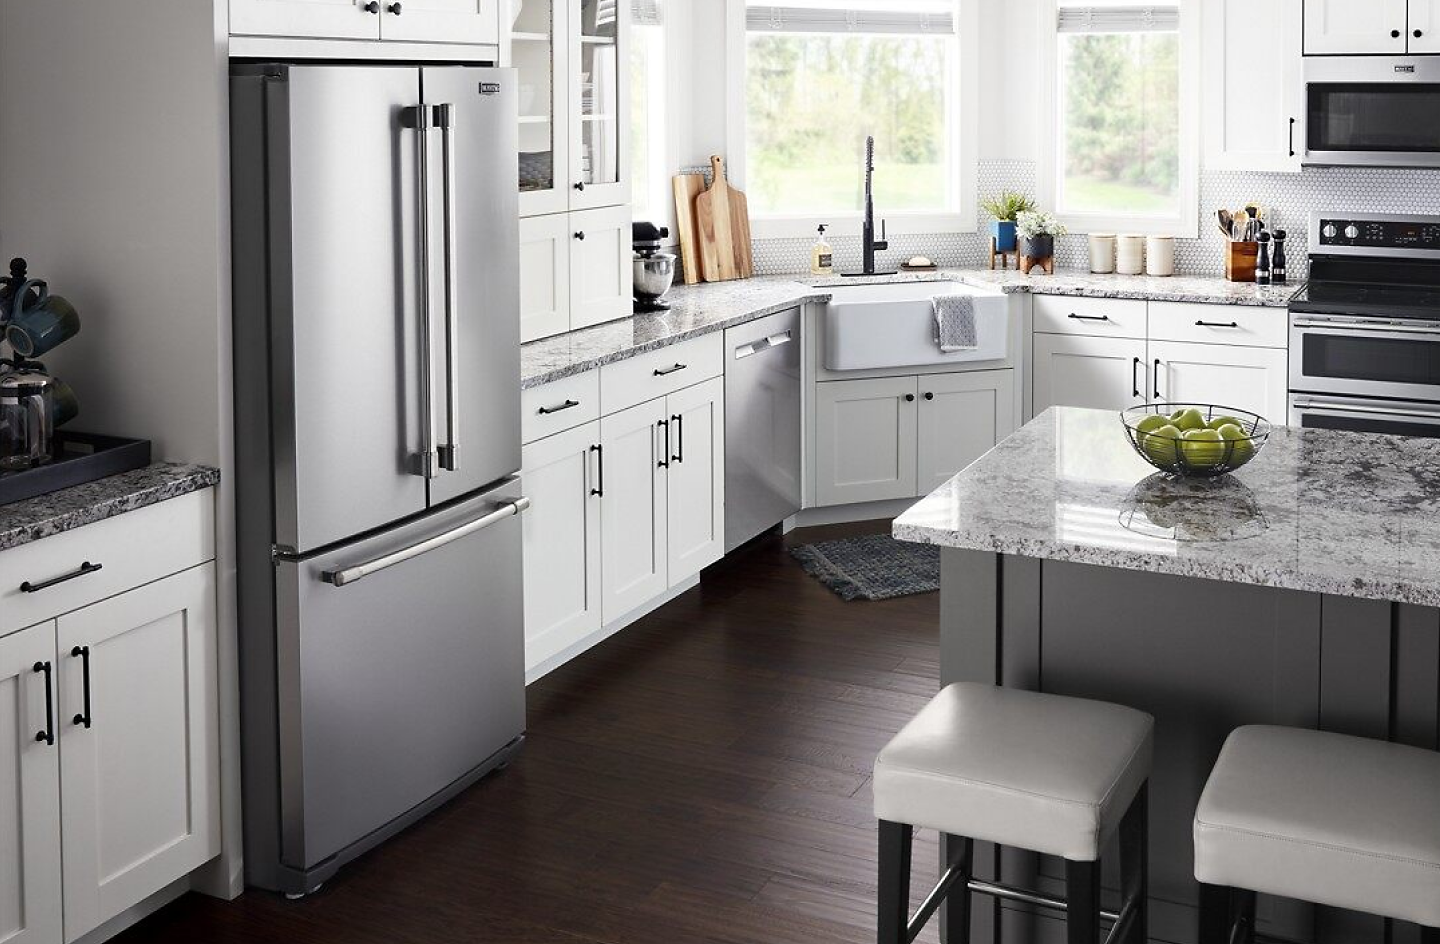 Open kitchen with a French door refrigerator, white cabinets and kitchen island